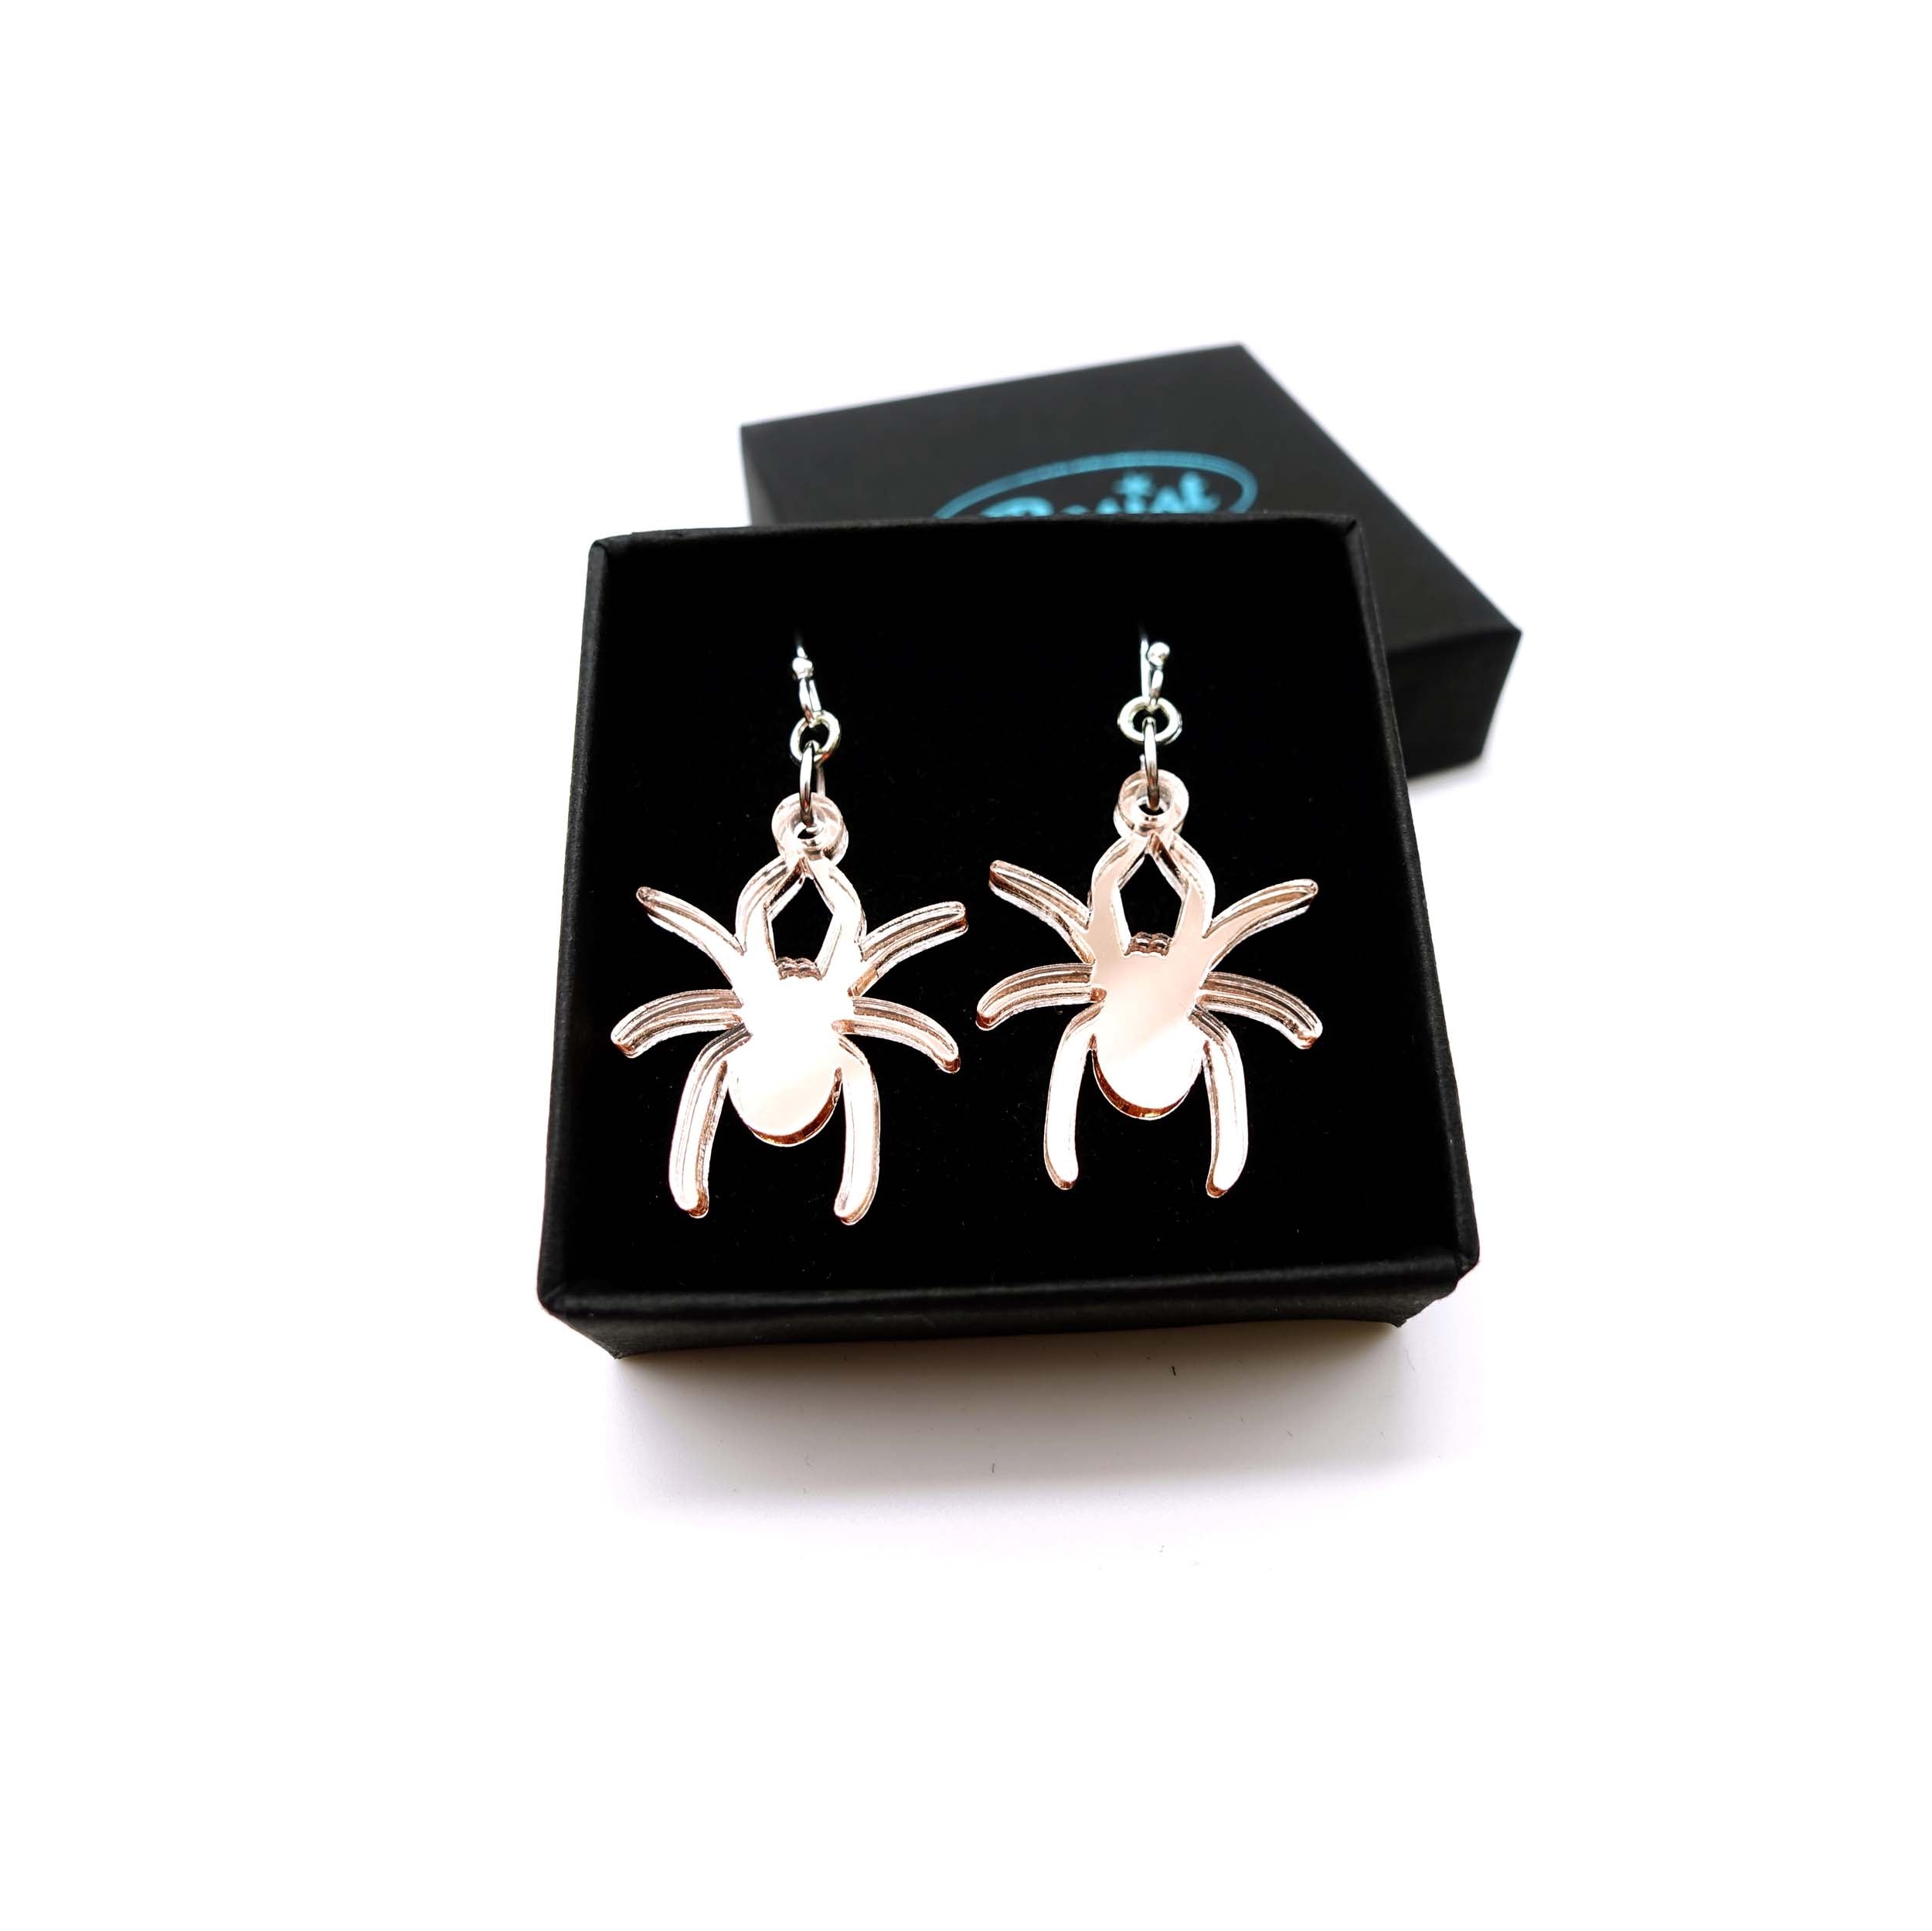 Lady Hale commemorative spider earrings in rose-gold mirror shown in box.